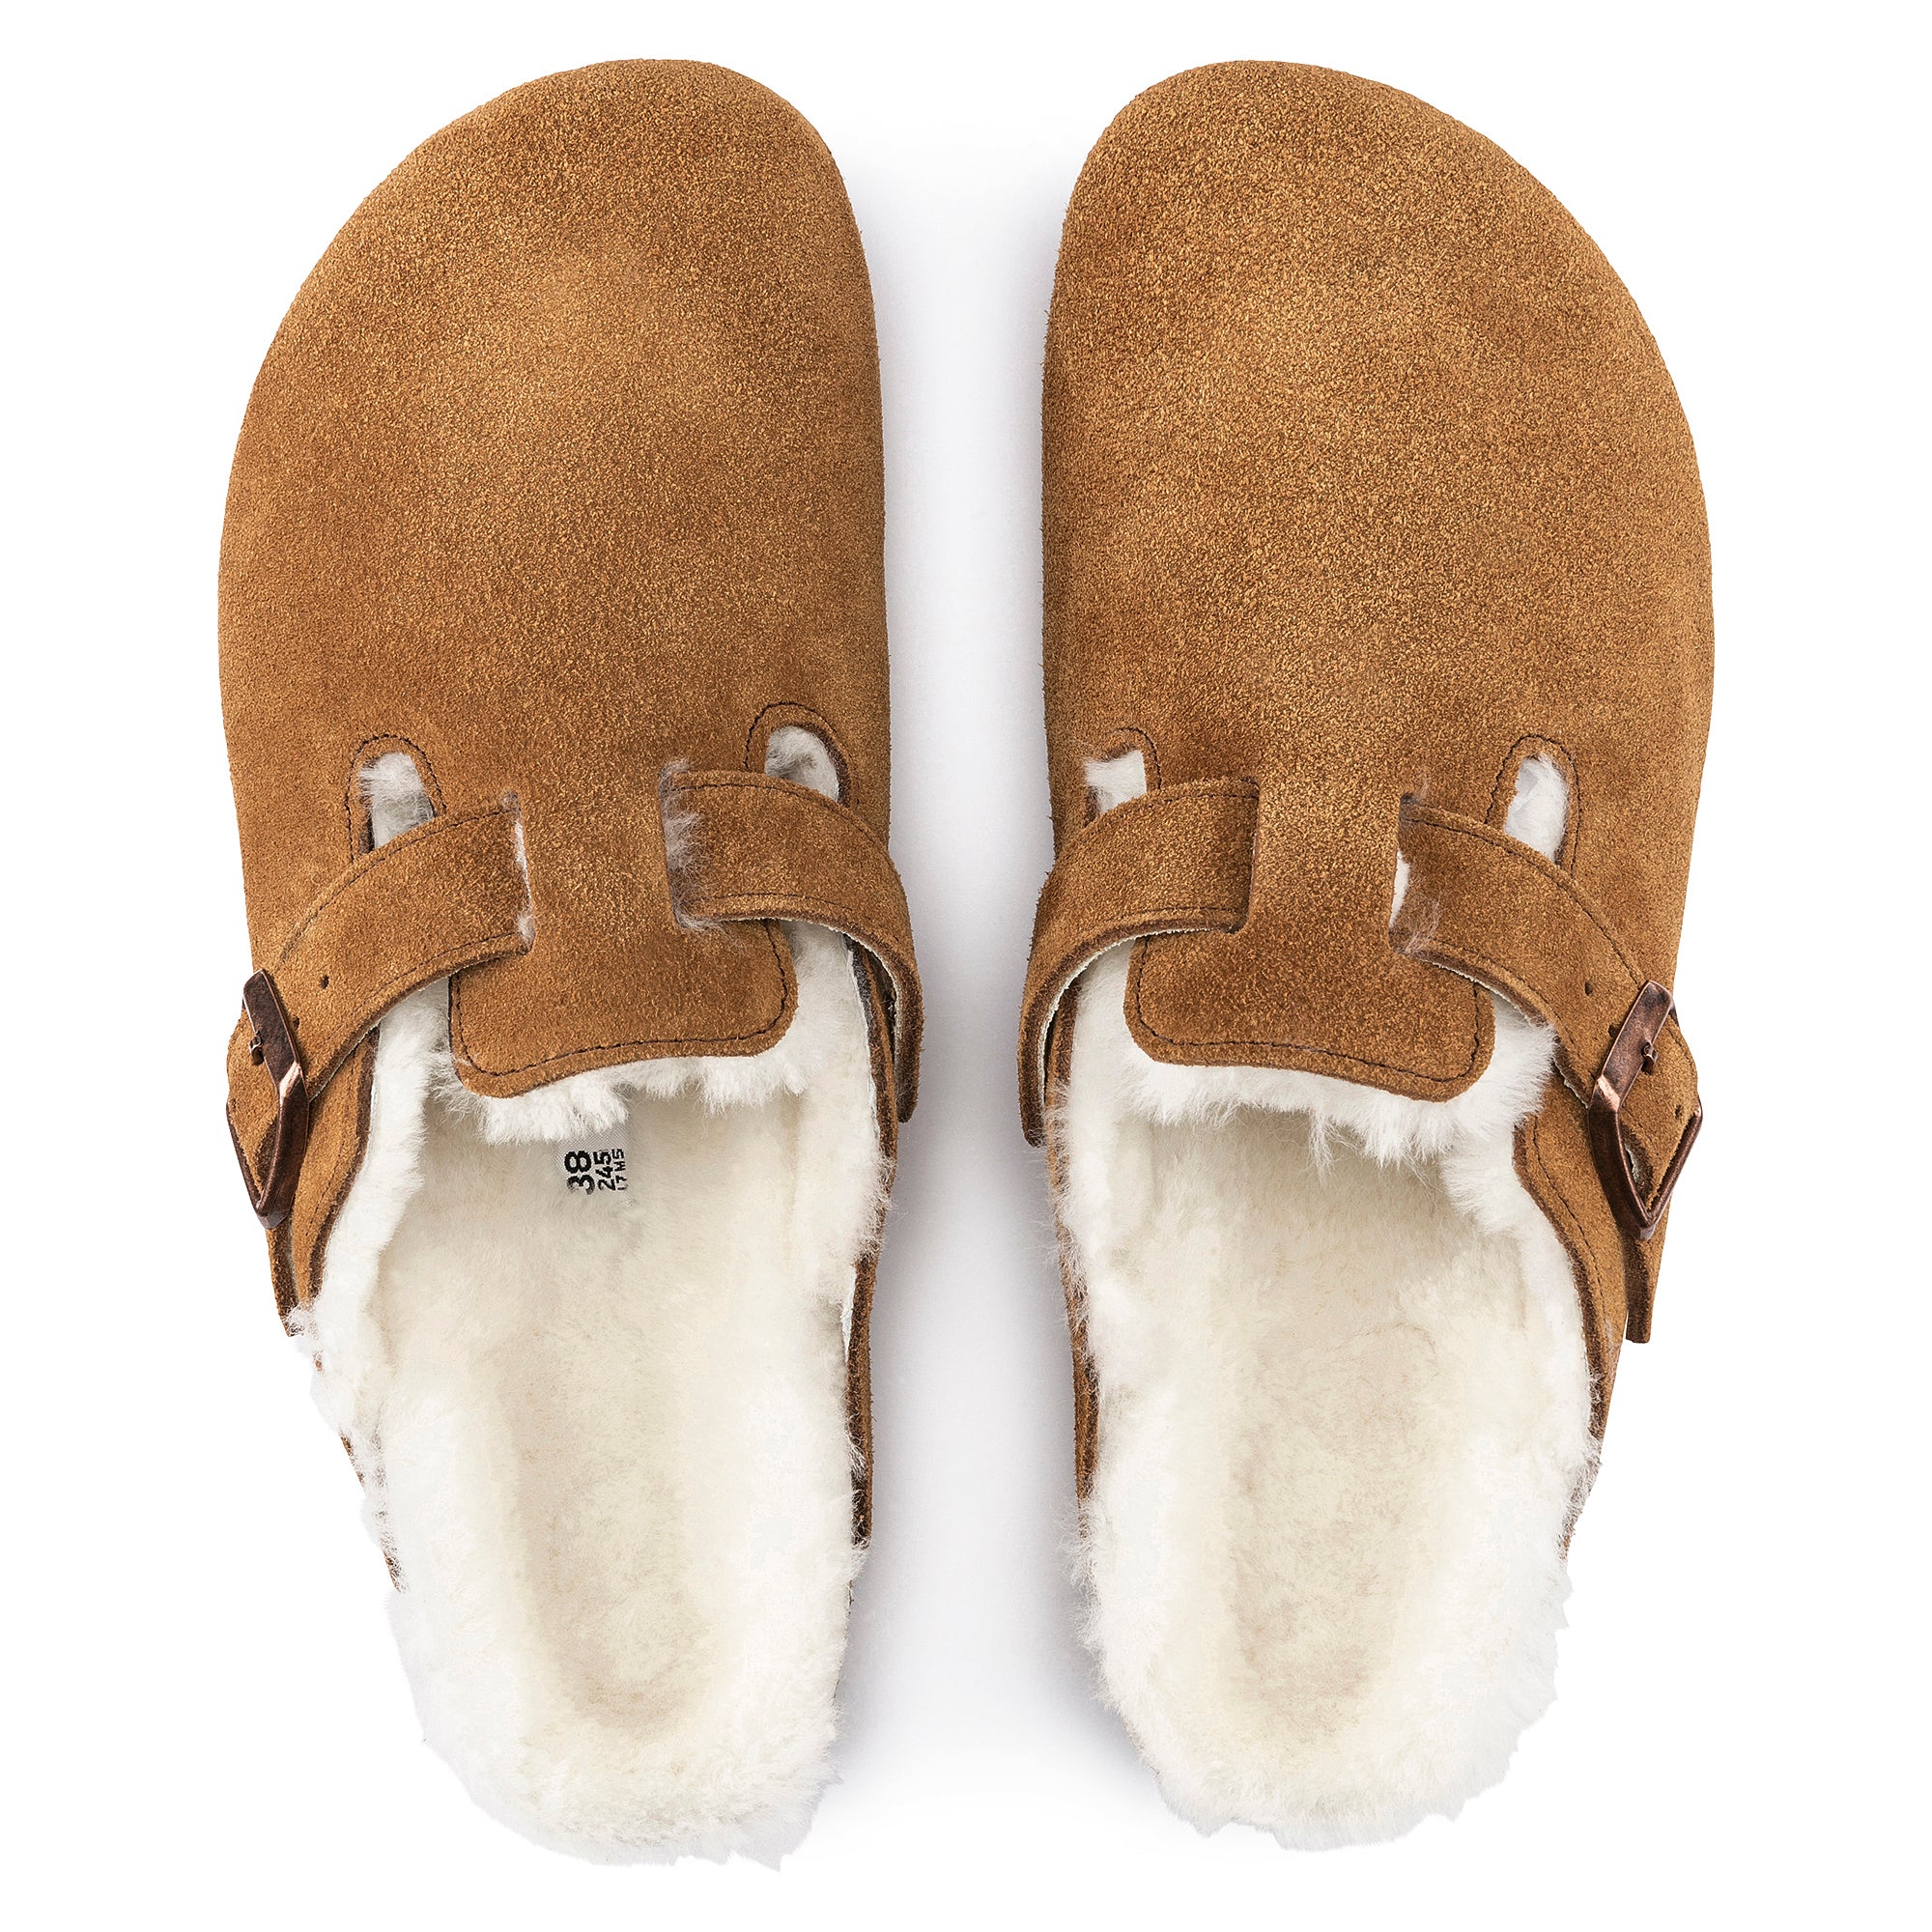 Boston Suede Leather/Shearling in Mink